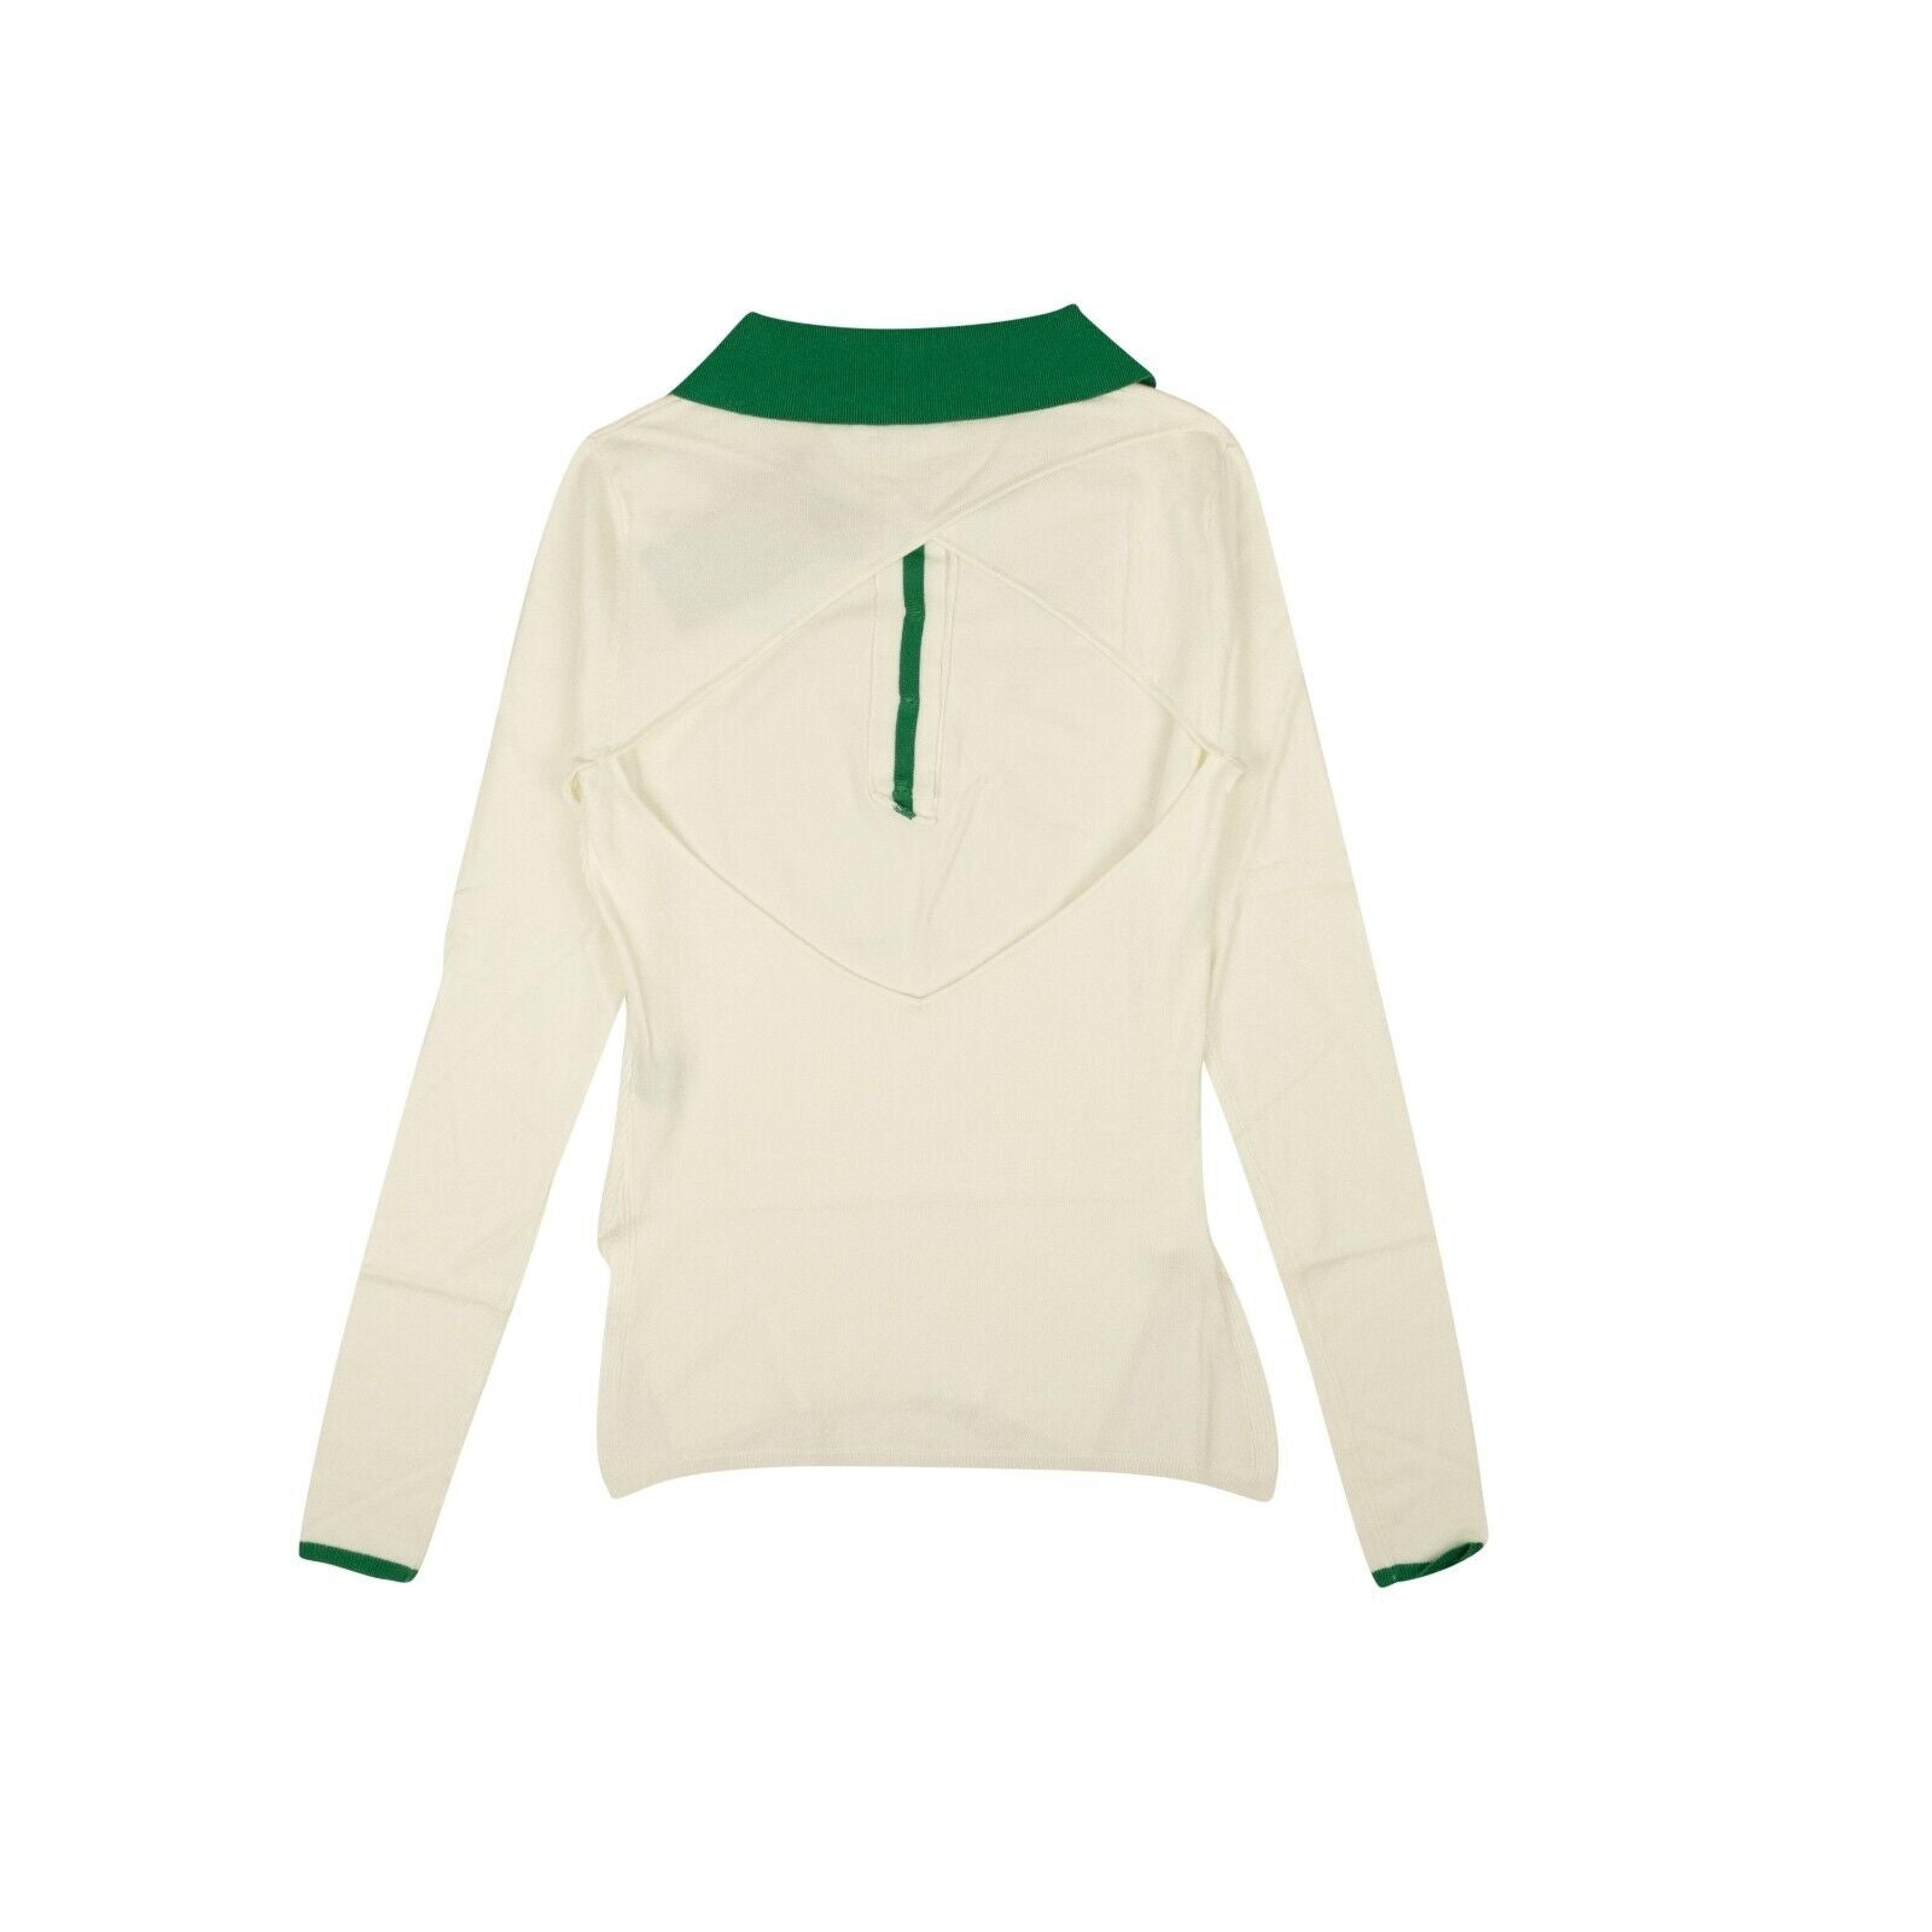 Alternate View 2 of Cream And Green Viscose F-1 Long Sleeve Polo Shirt